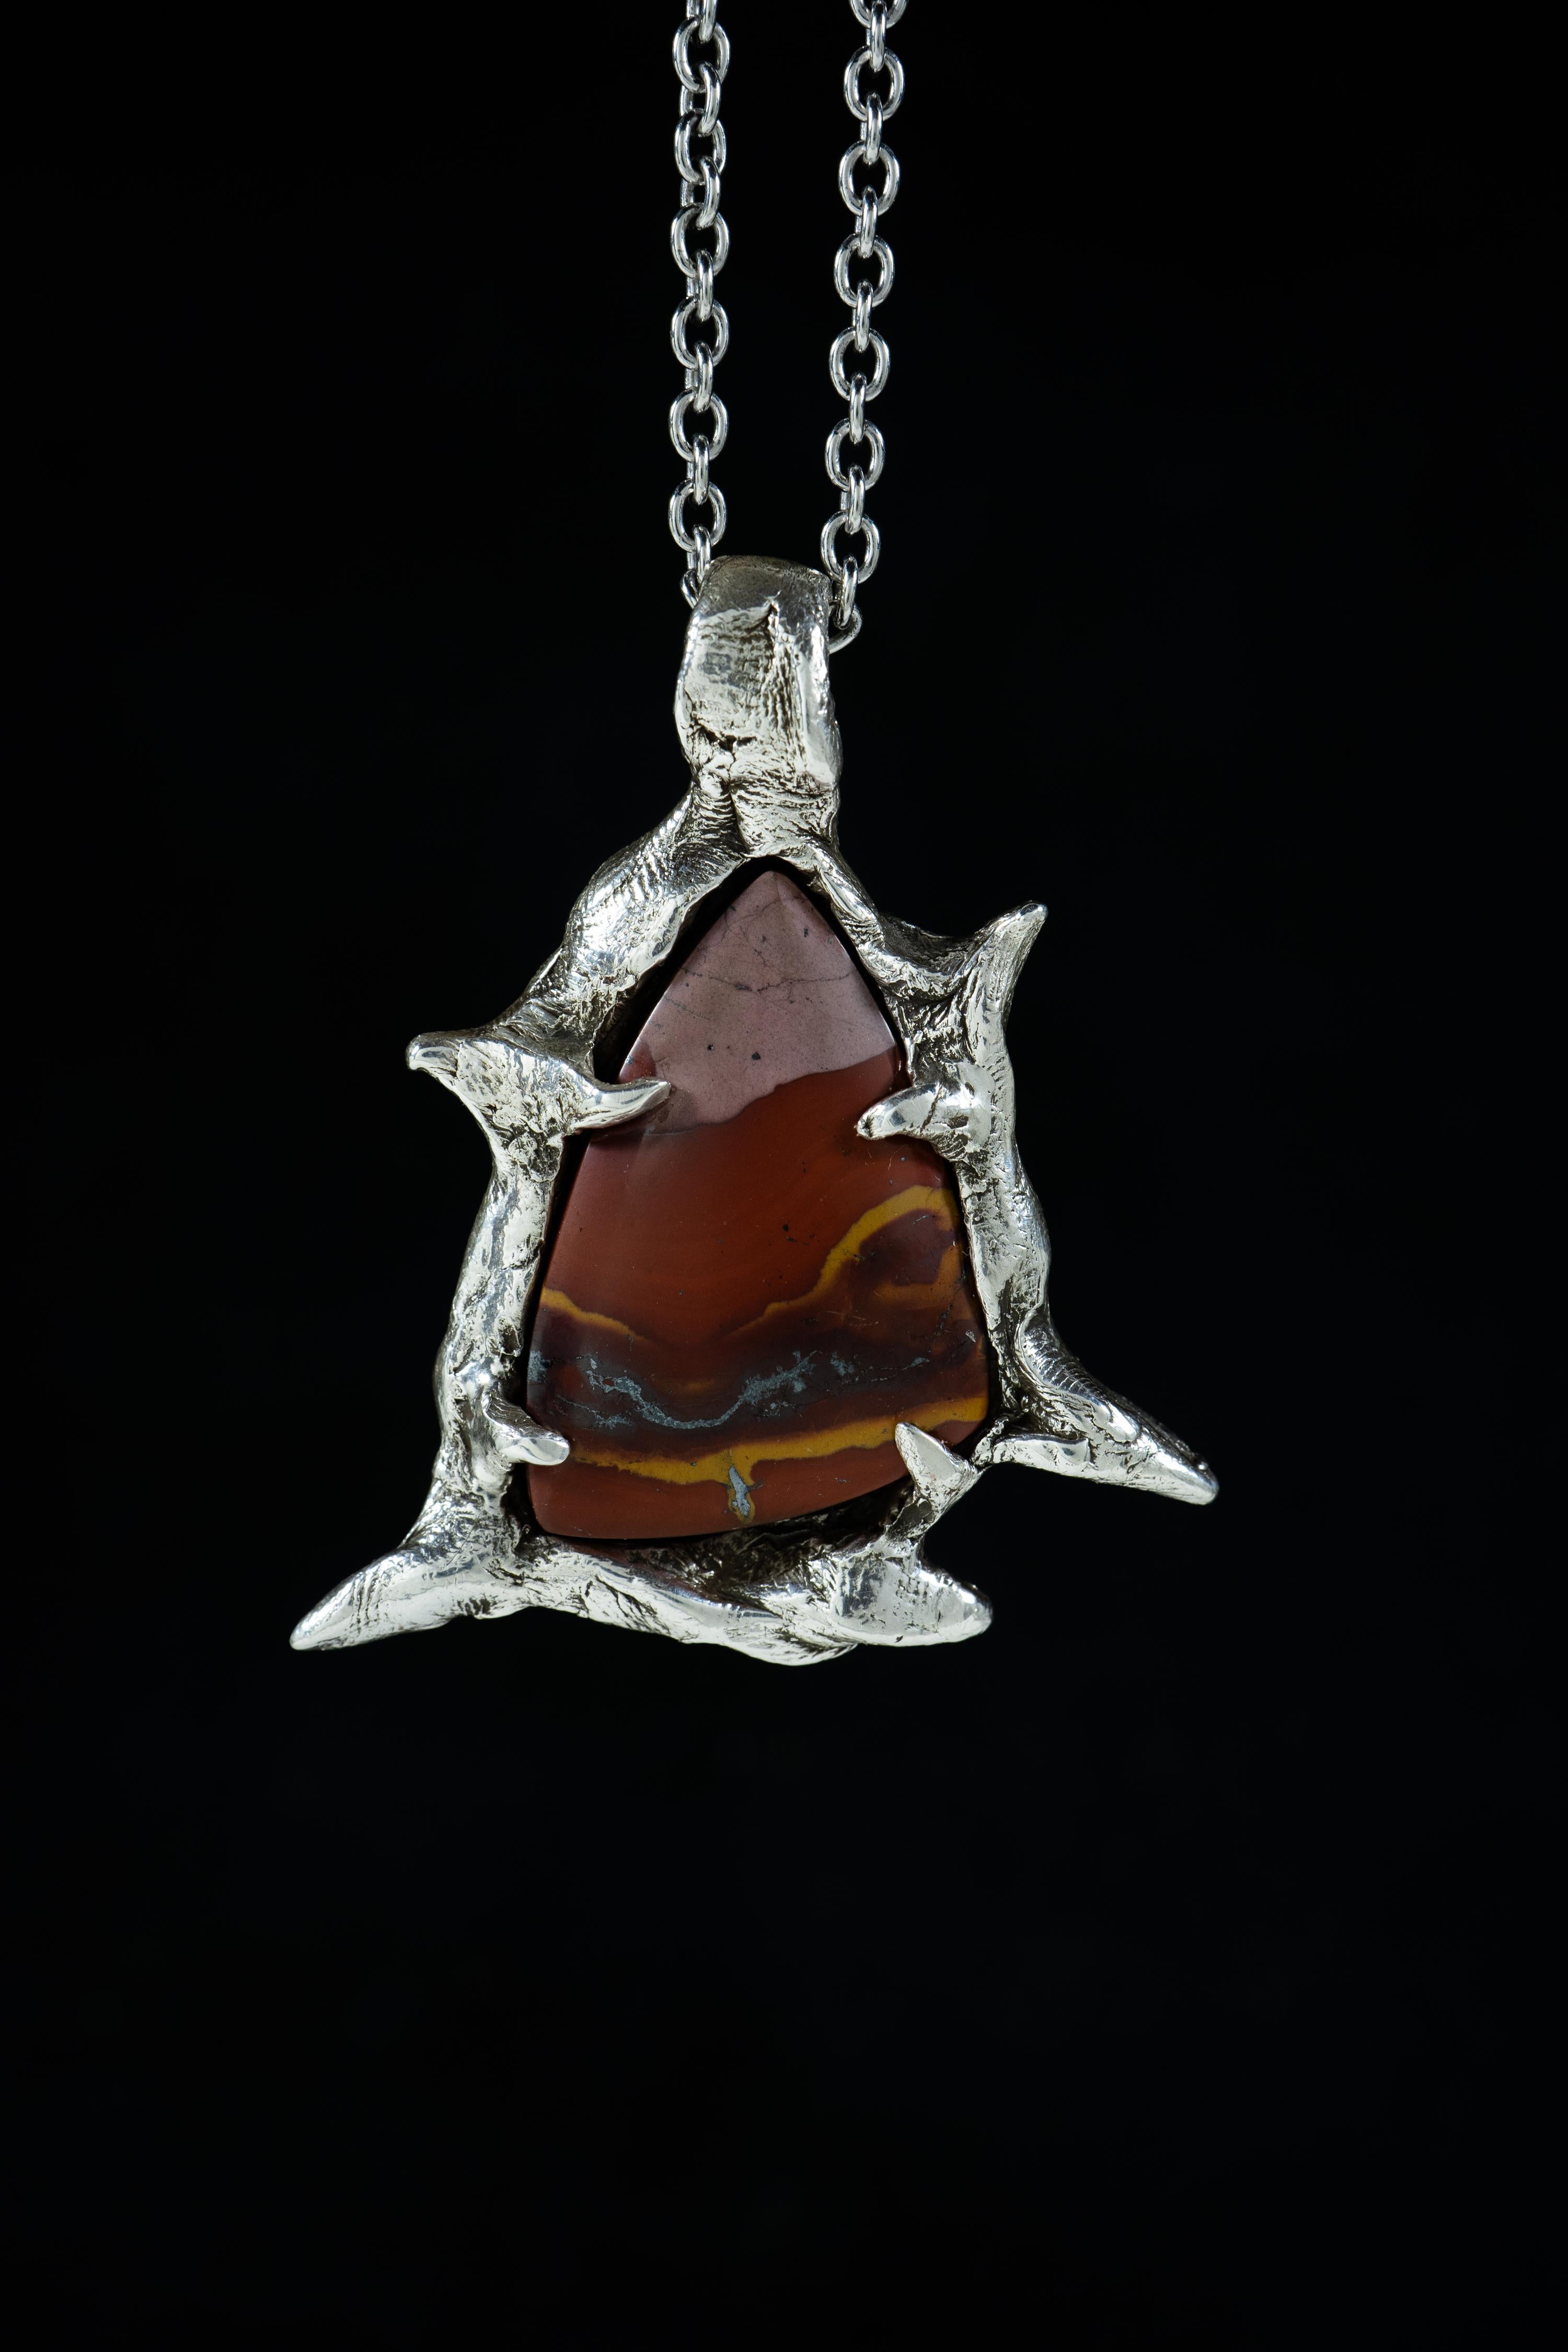 Canyon and the Star is a one-of-a-kind pendant by Ken Fury that is hand-carved and cast in sterling silver and features a natural Red & Green Blanket Jasper from Peru.

Size of piece: 58mm x 50mm

Hand-signed

Includes a 24-inch sterling silver